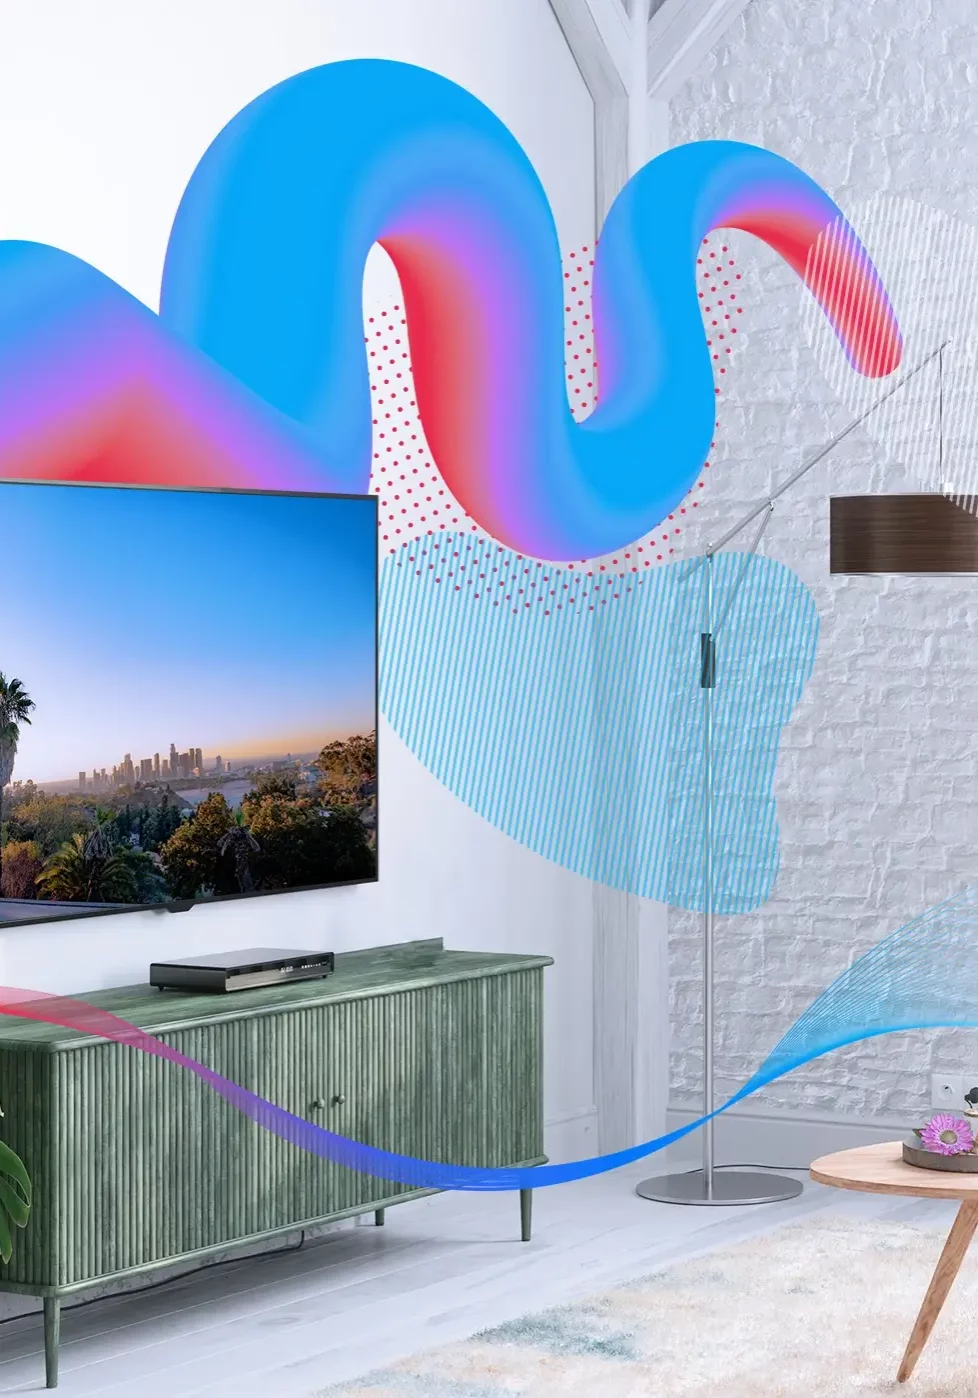 Image of a TV in a living room surrounded by abstract elements